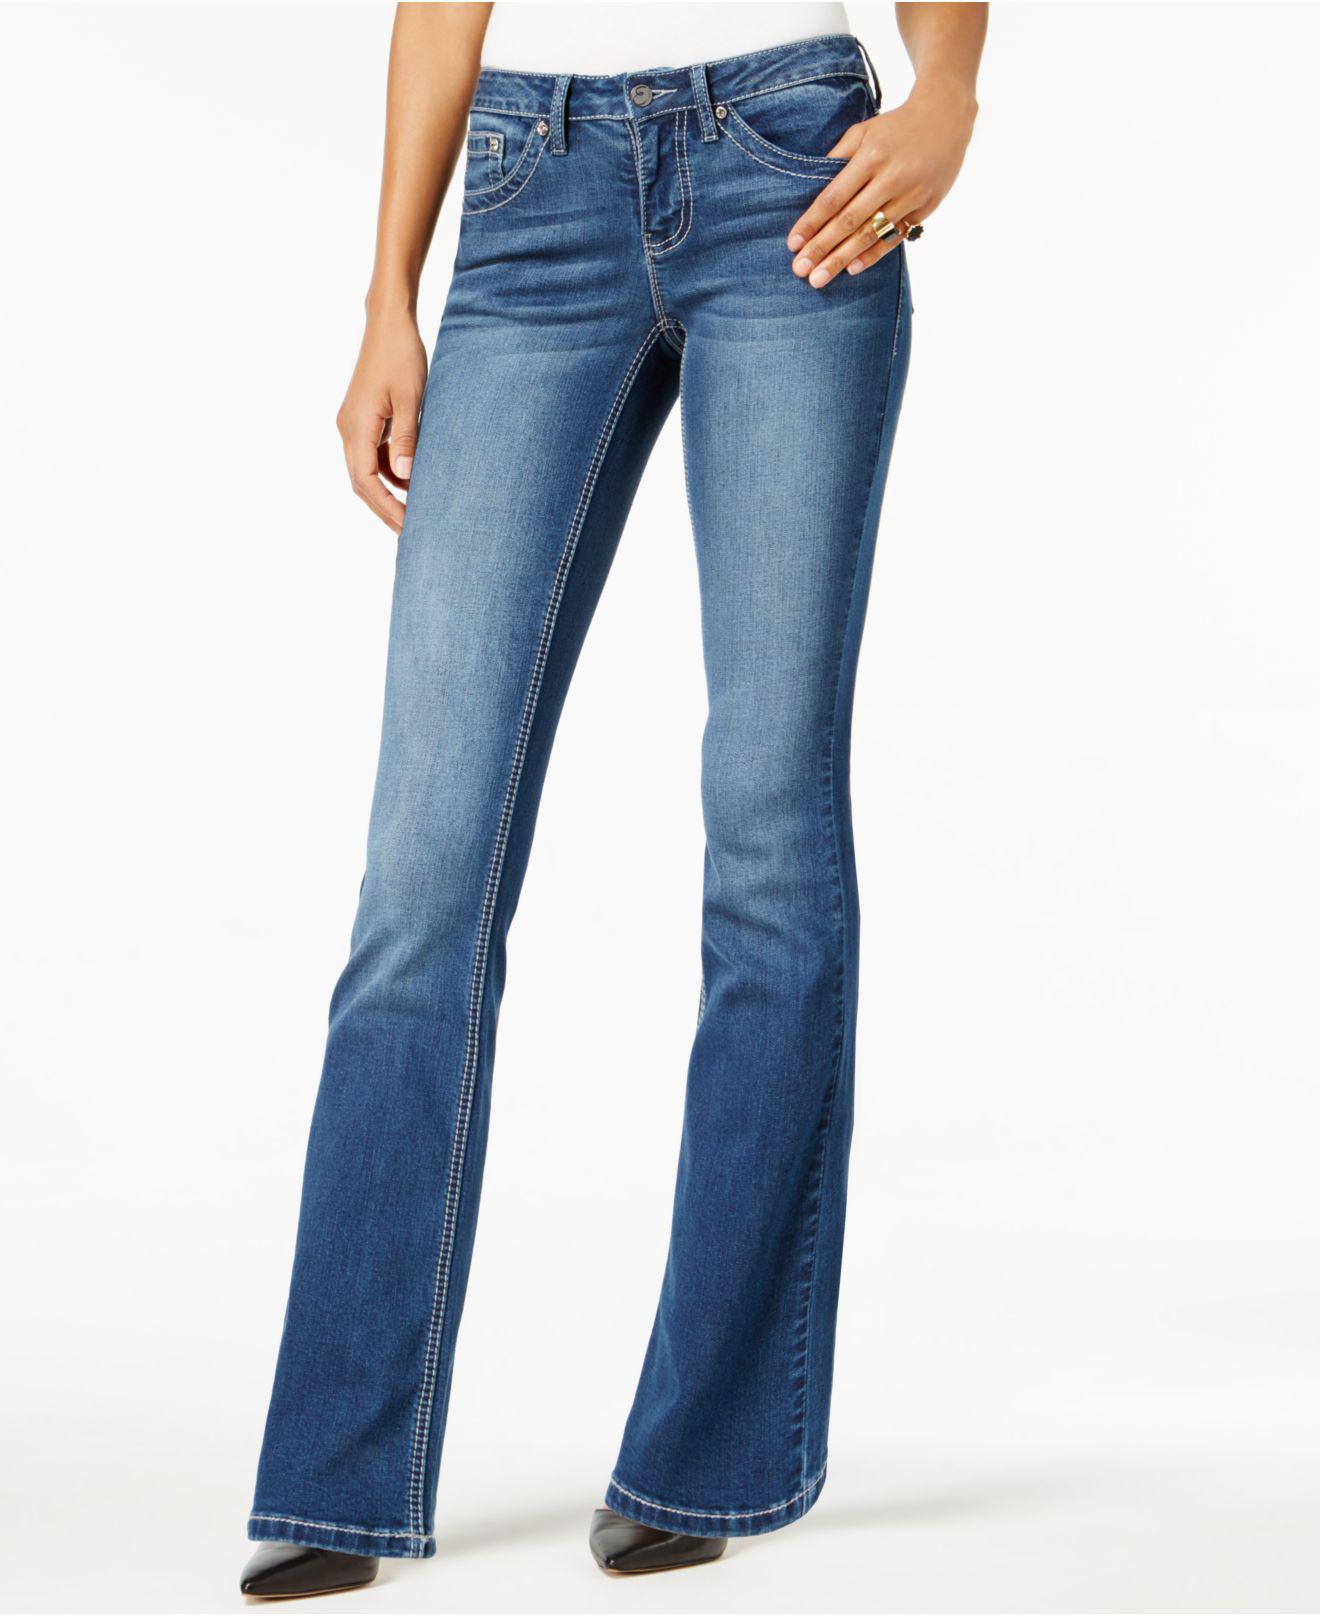 Earl Jean Embroidered Bootcut Jeans in Blue